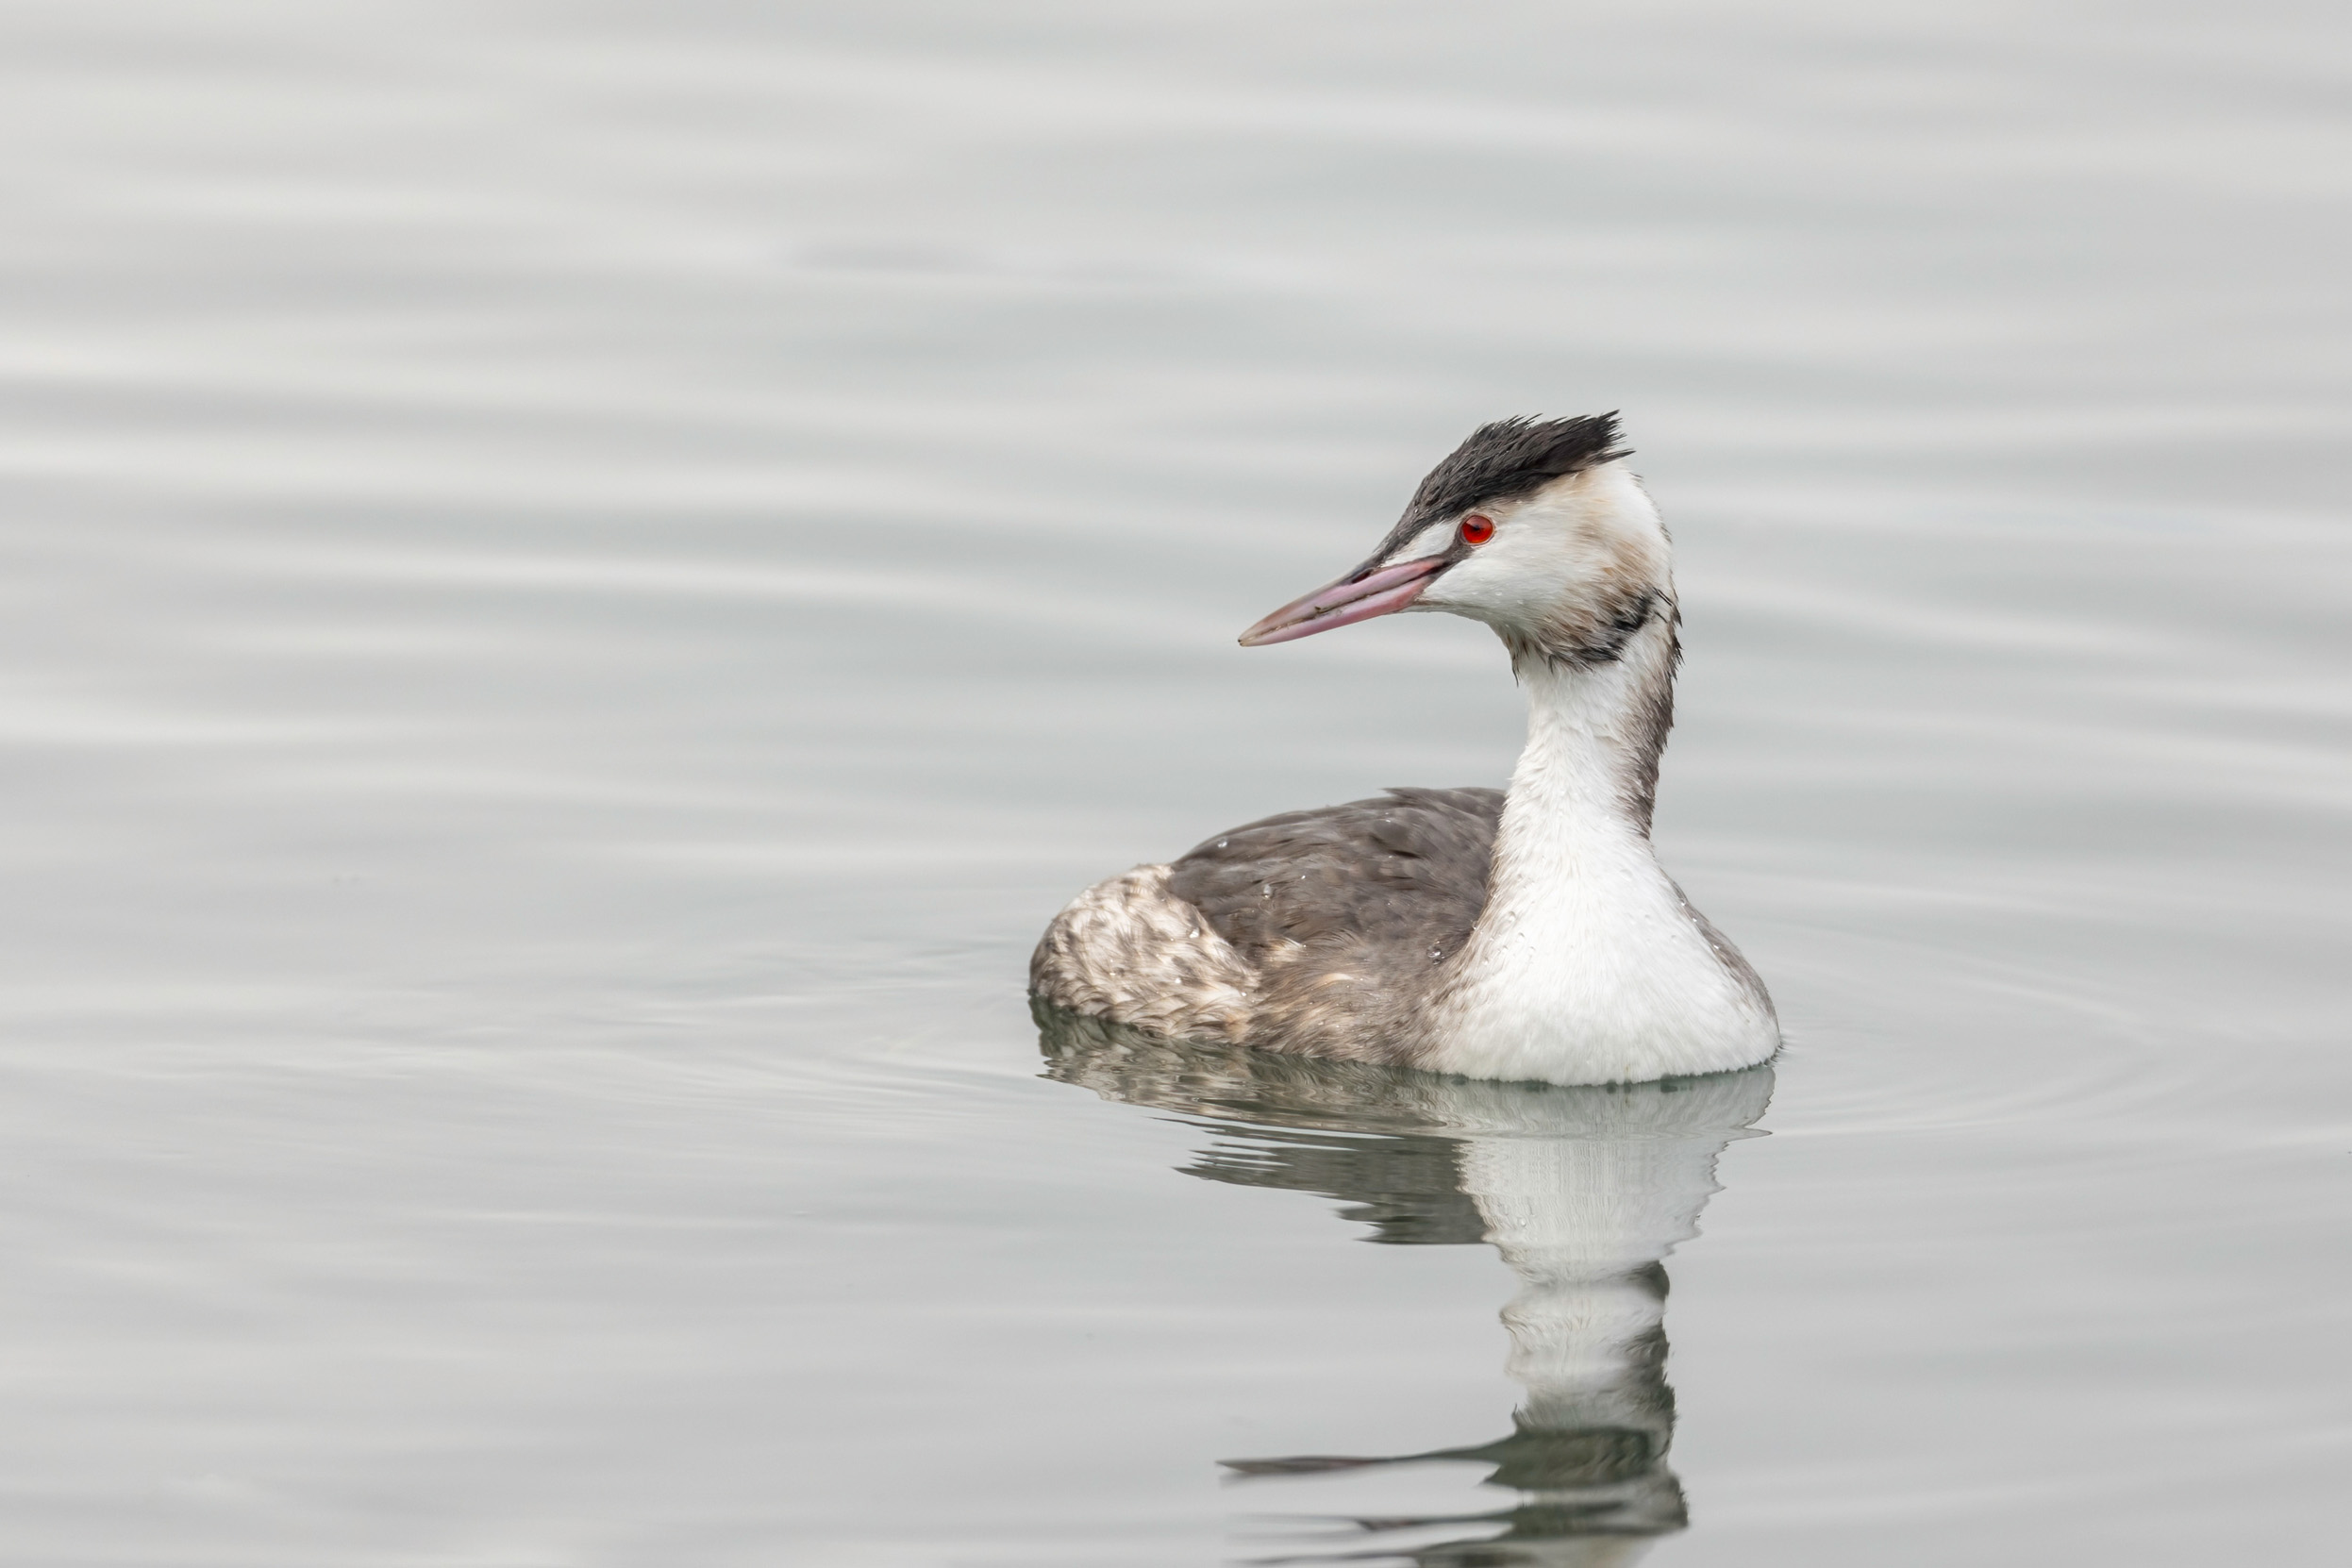 A Great Crested Grebe swimming in winter waters.